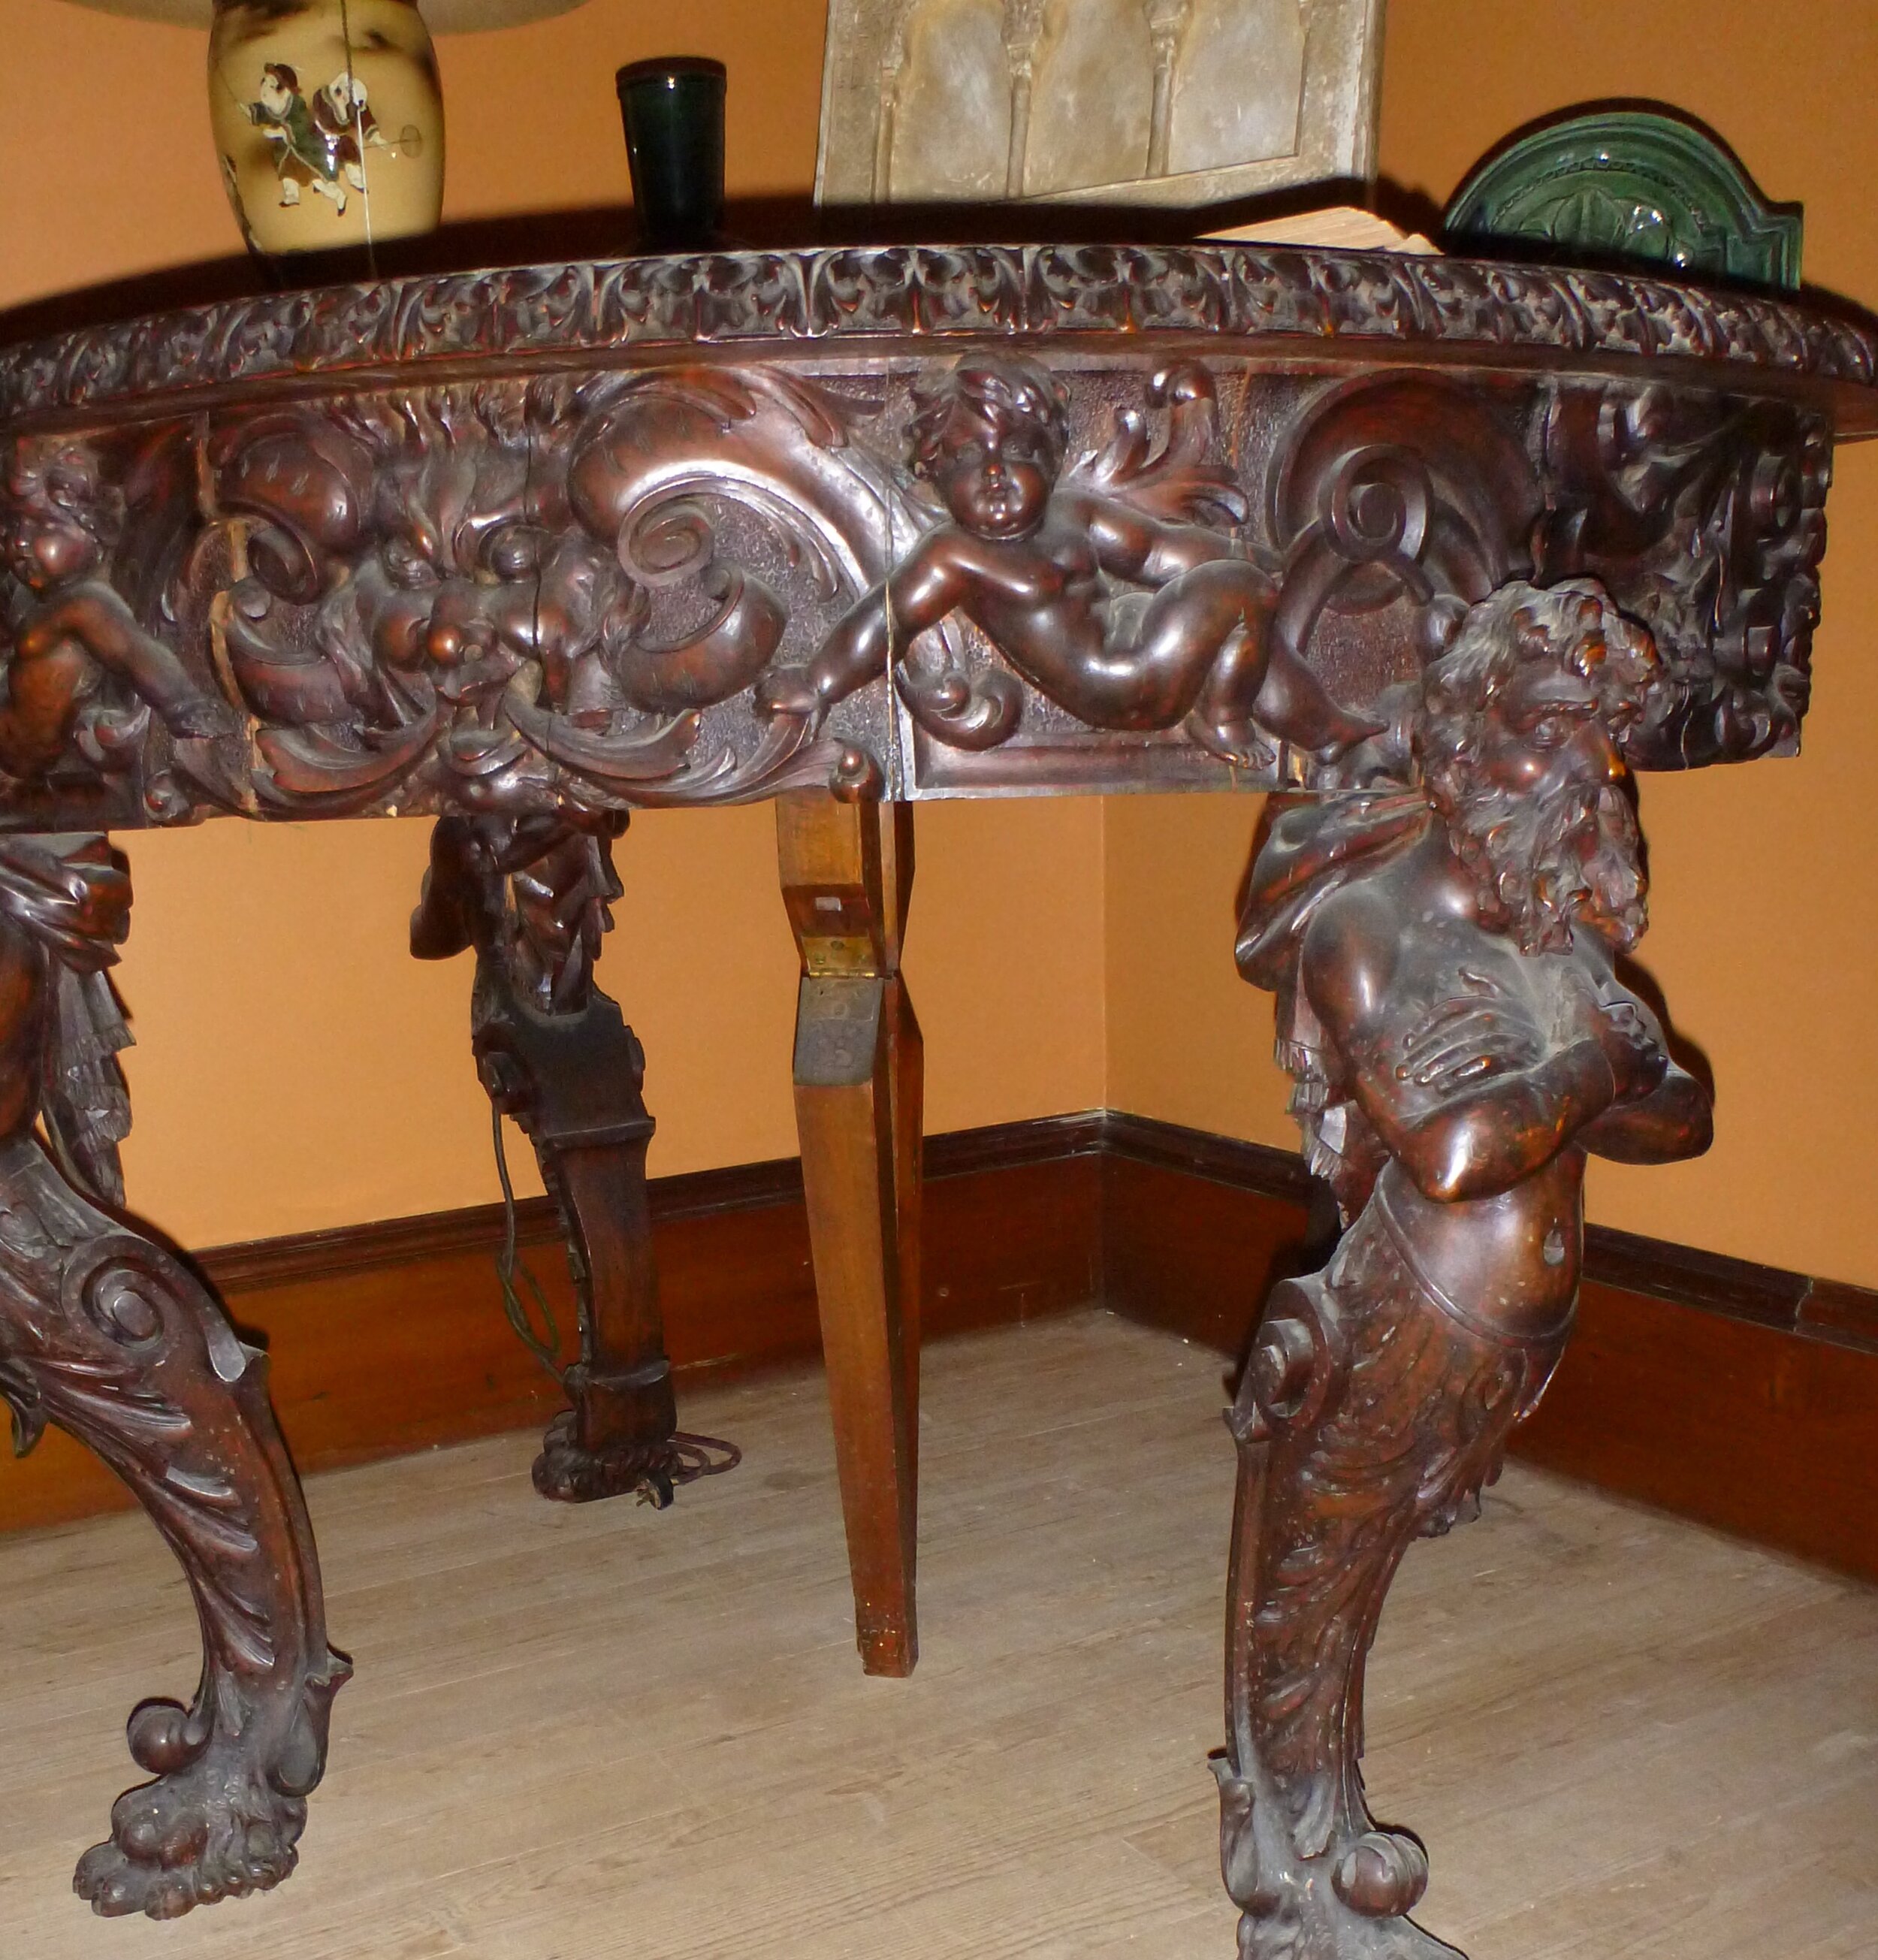 The furniture was heavy and massive and had elegant carvings of strong men for legs holding up the table top